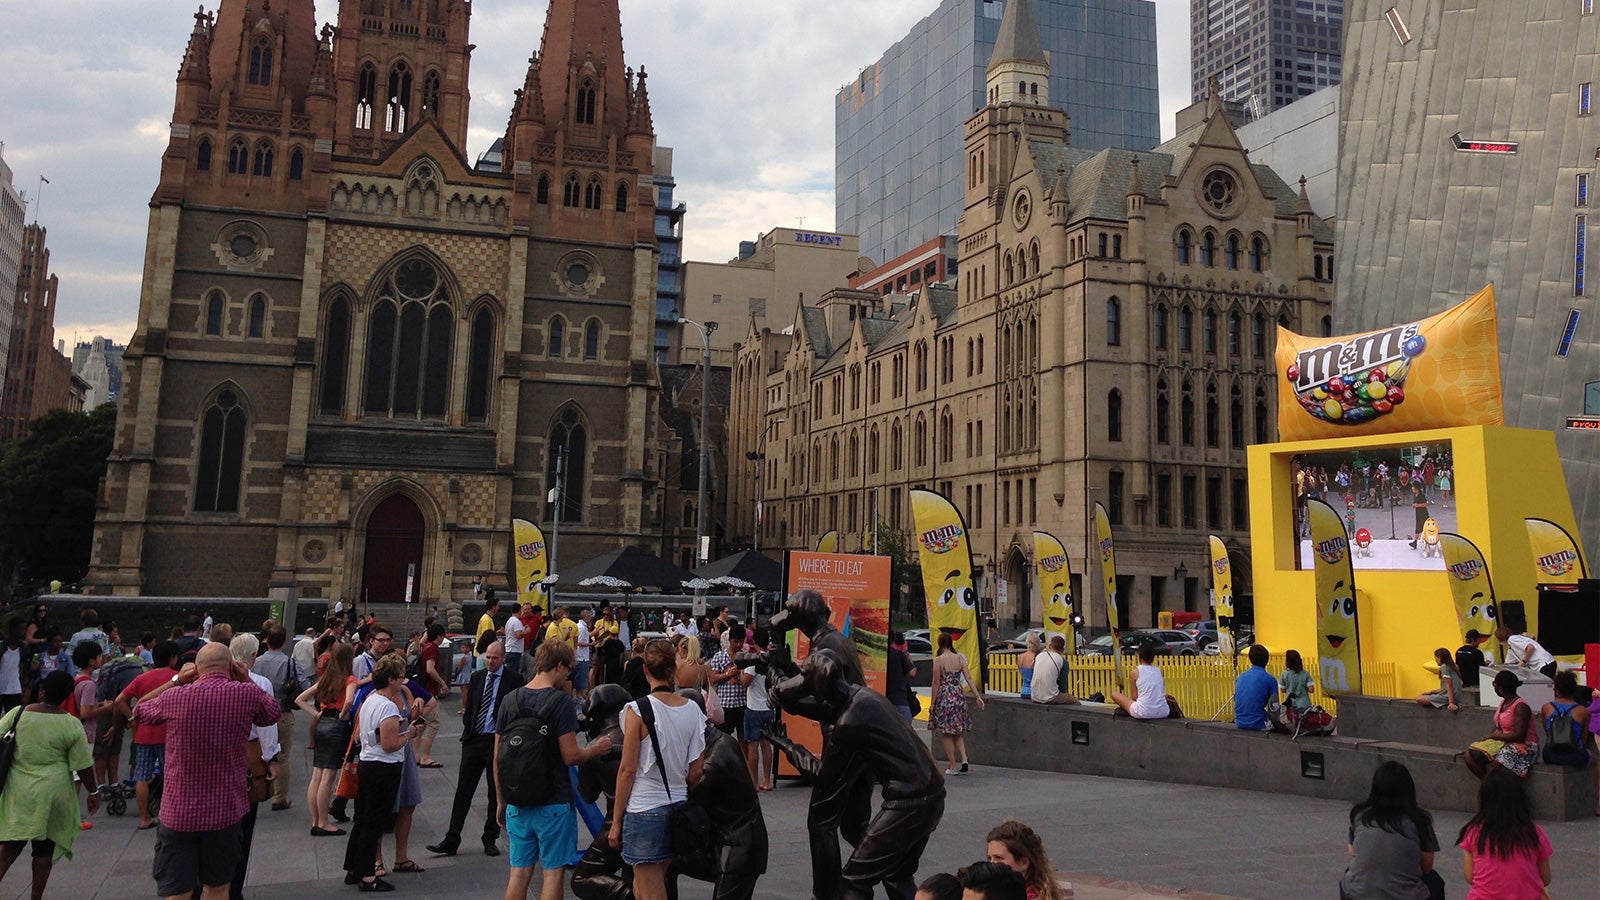 M&M's | M&M's augmented reality display in Melbourne's Federation Square | Devotion